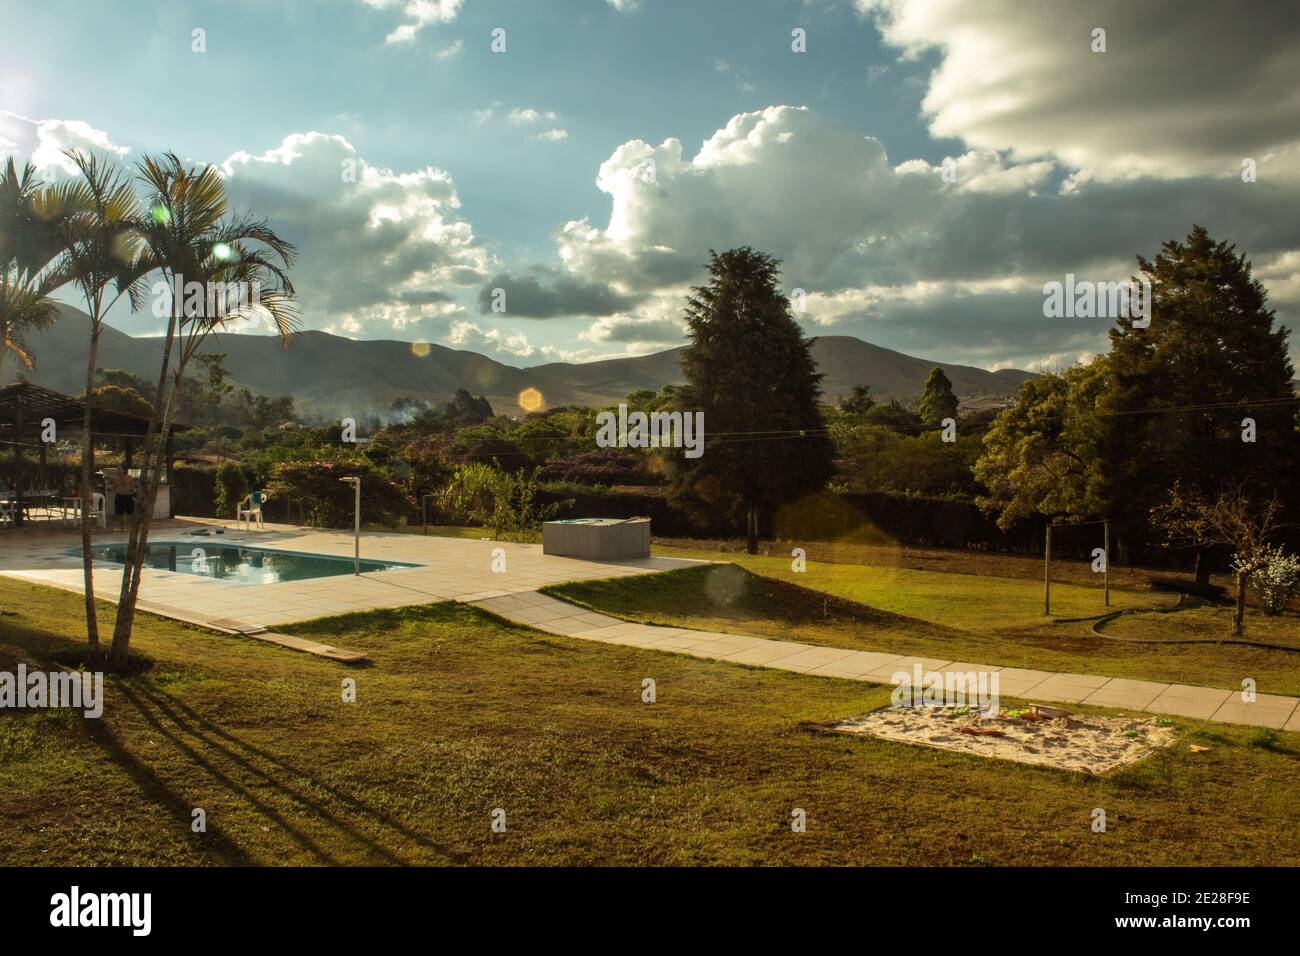 Photograph at sunset of country side landscape with mountains, trees and a pool, with lens flare. Stock Photo